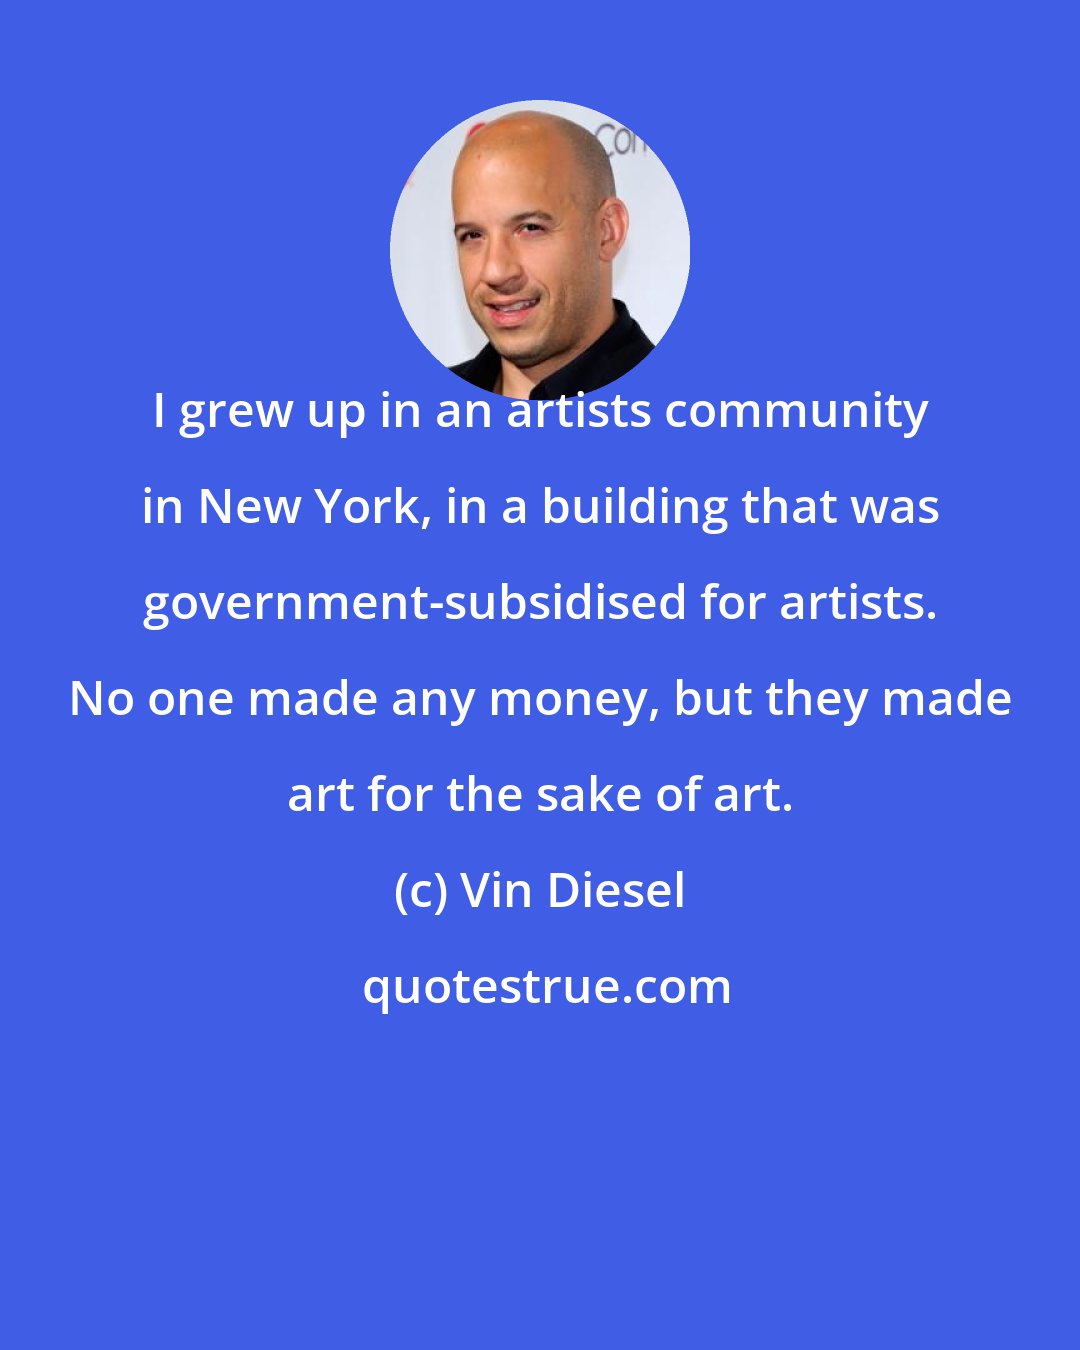 Vin Diesel: I grew up in an artists community in New York, in a building that was government-subsidised for artists. No one made any money, but they made art for the sake of art.